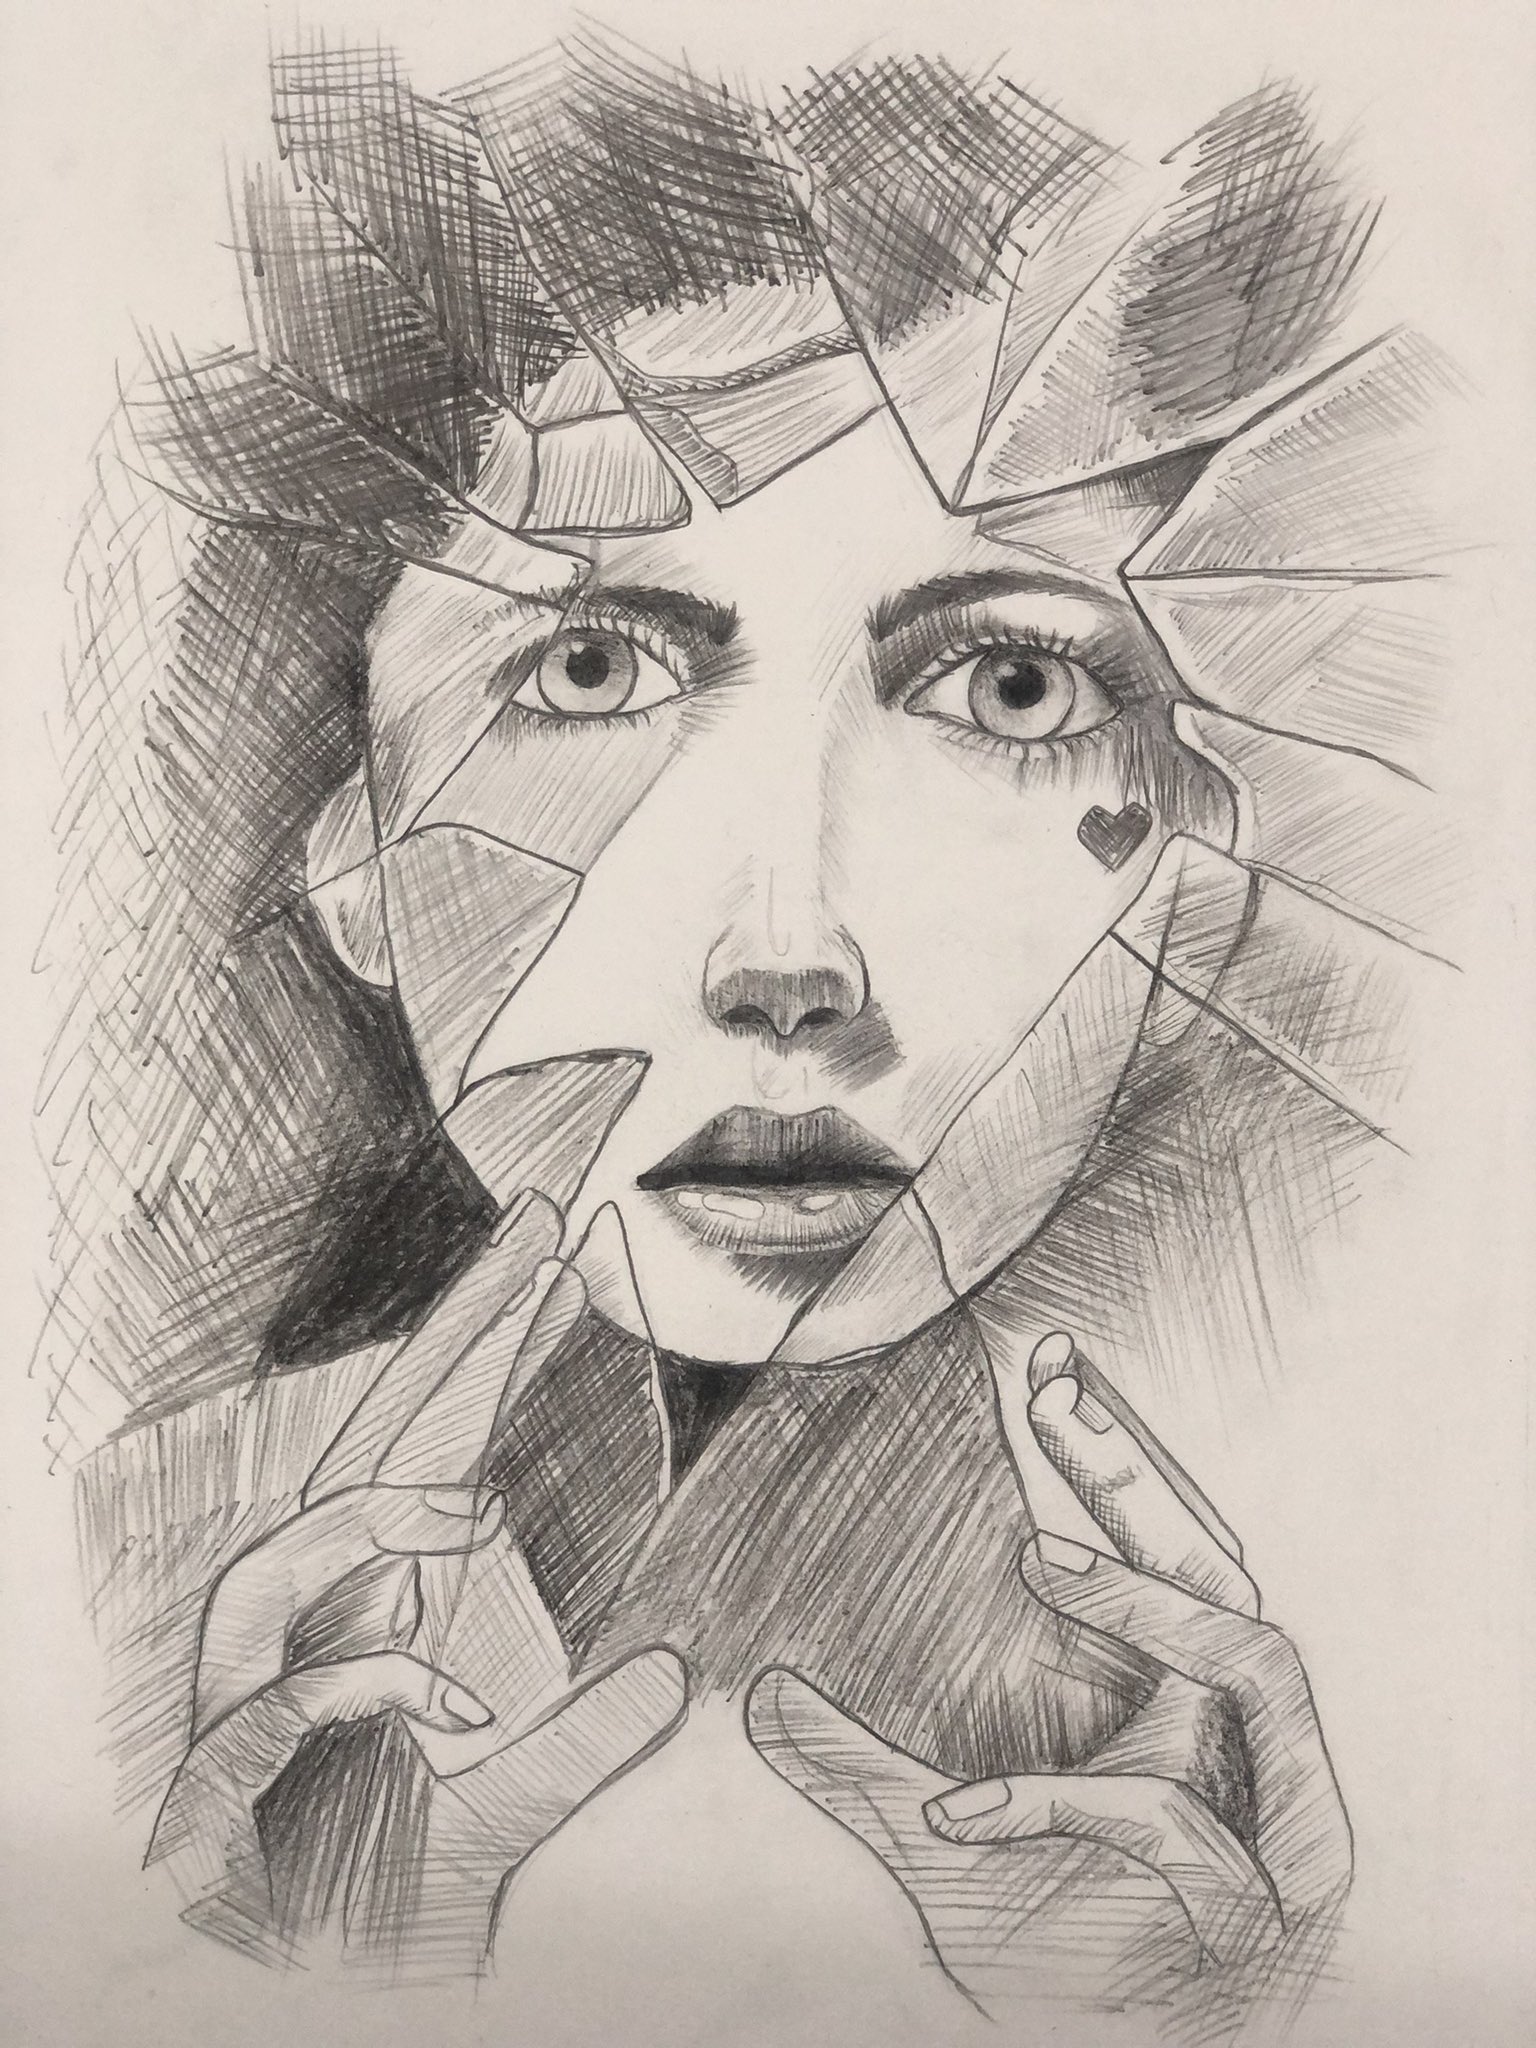 Pencil Sketch of face in broken mirror step by step- Sheri Artist - YouTube